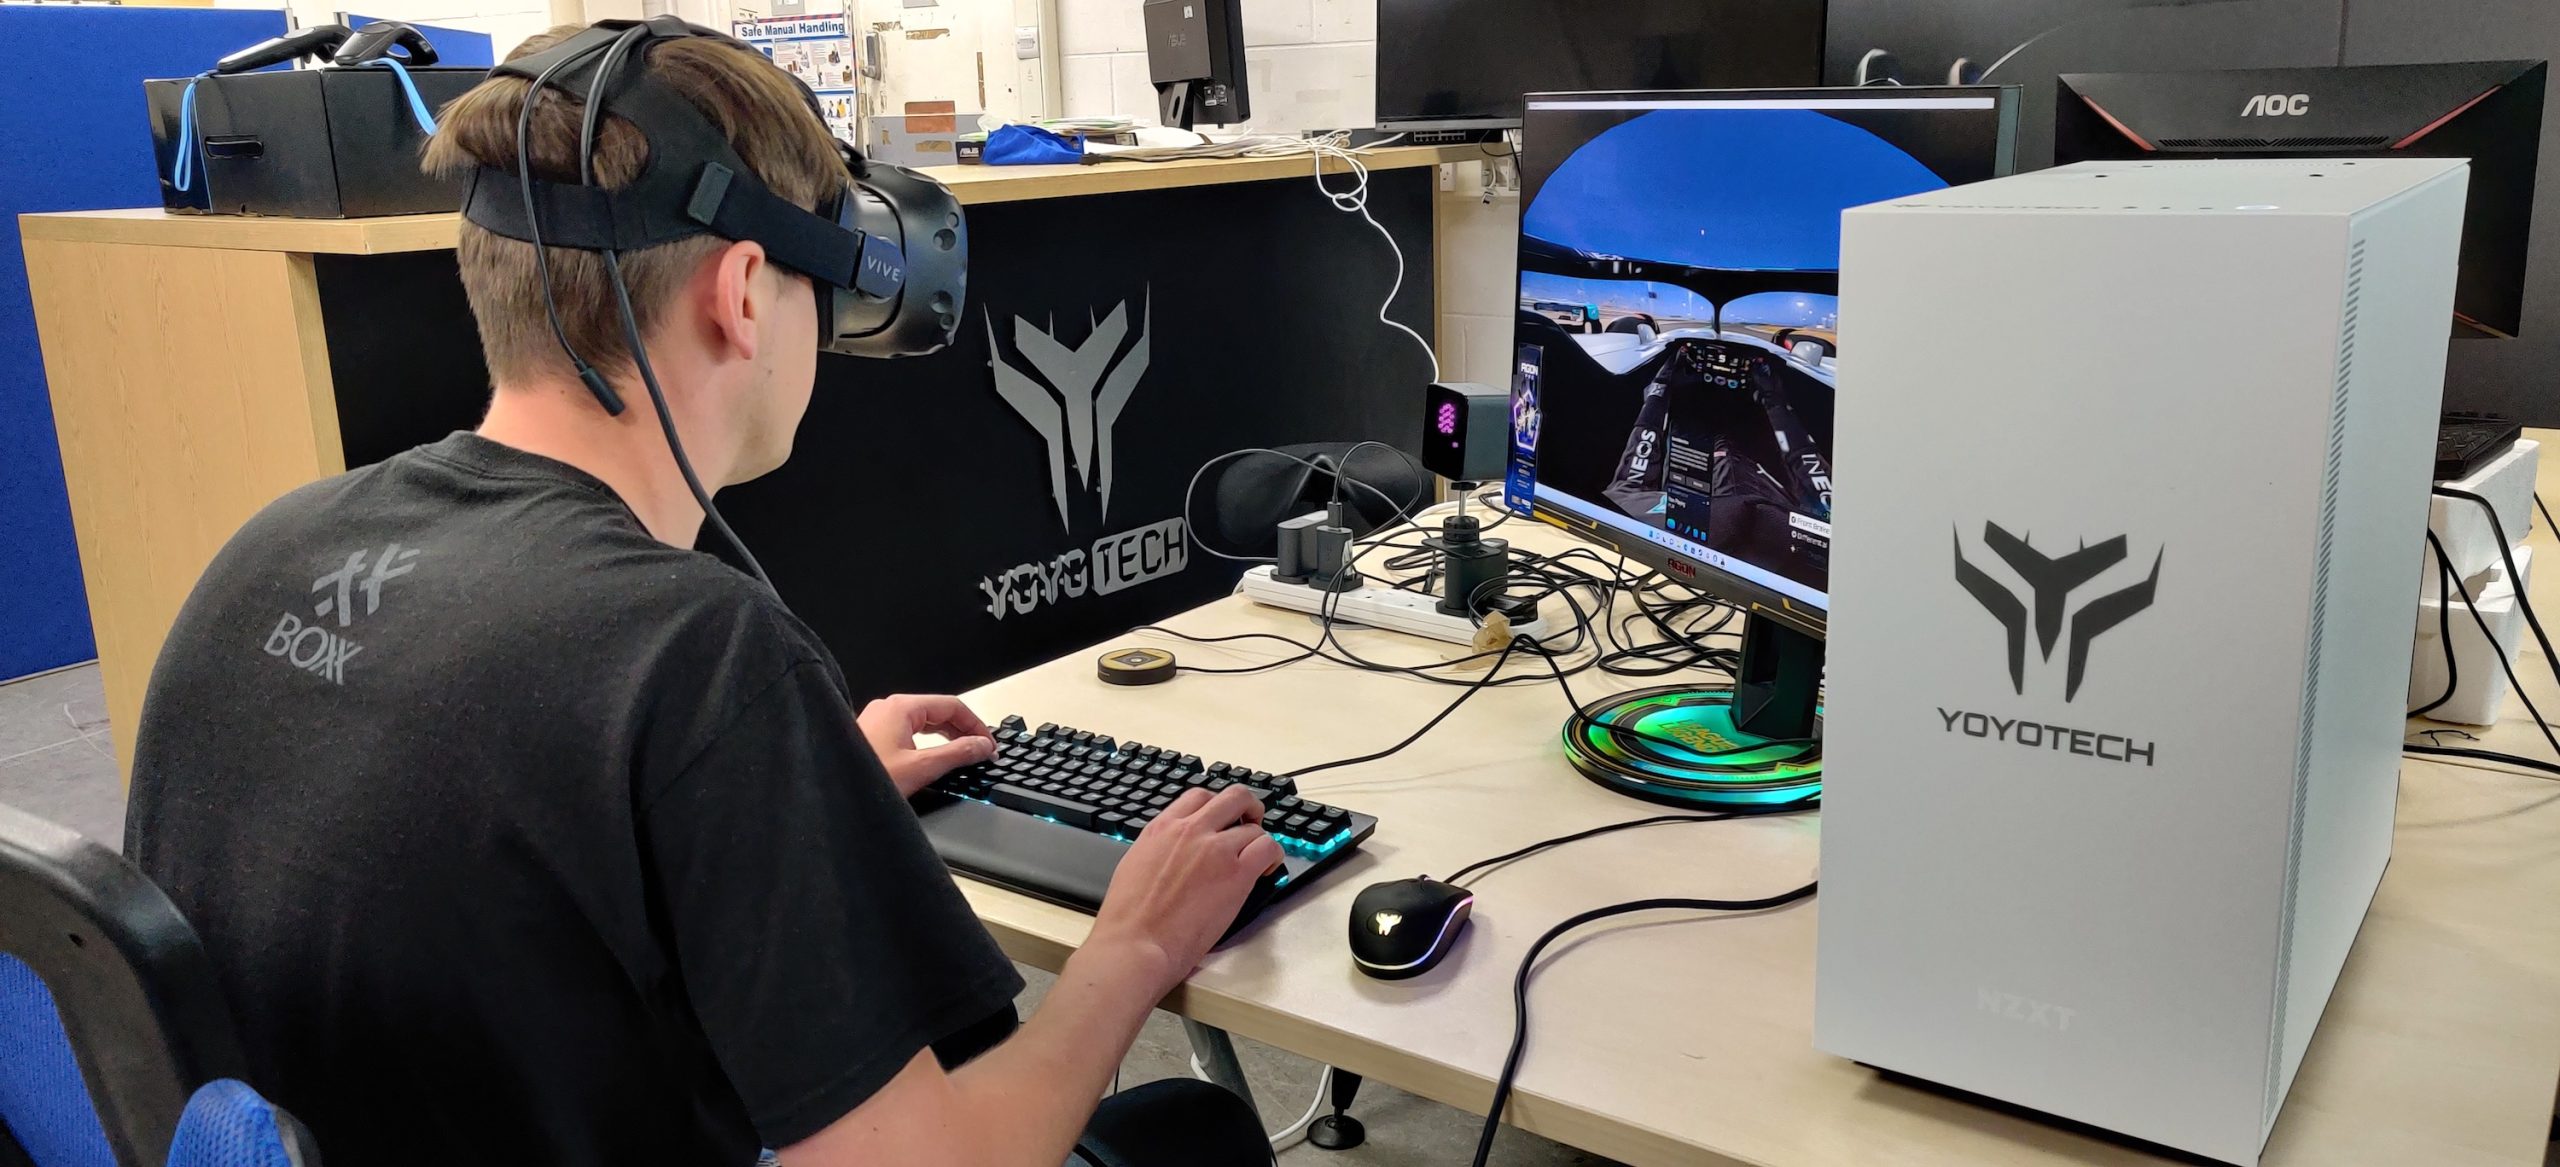 Young man wearing VR headset playing VR game on Yoyotech computer with keyboard